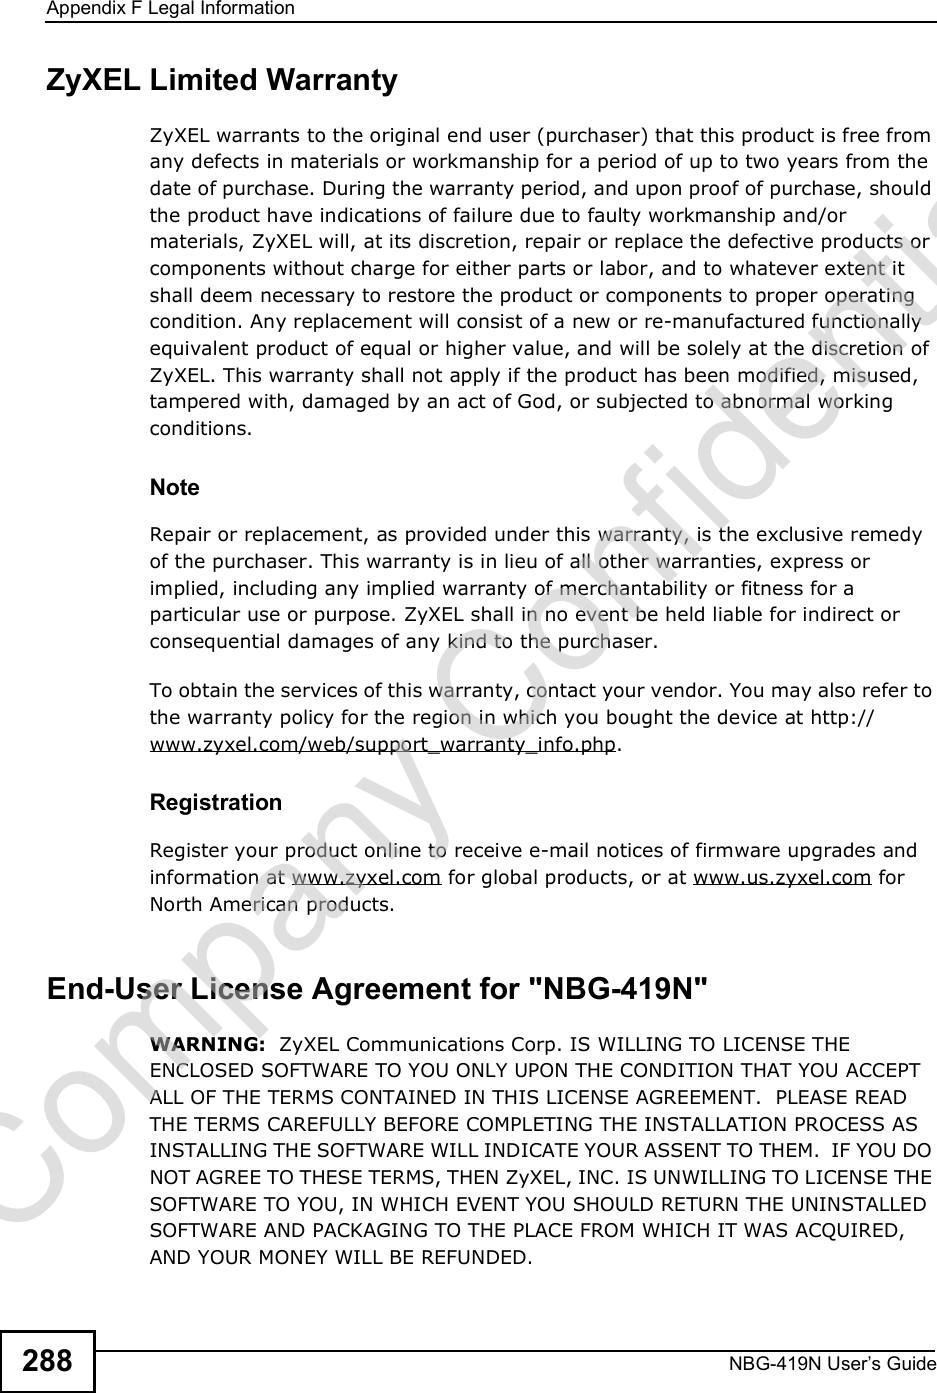 Appendix FLegal InformationNBG-419N User s Guide288ZyXEL Limited WarrantyZyXEL warrants to the original end user (purchaser) that this product is free from any defects in materials or workmanship for a period of up to two years from the date of purchase. During the warranty period, and upon proof of purchase, should the product have indications of failure due to faulty workmanship and/or materials, ZyXEL will, at its discretion, repair or replace the defective products or components without charge for either parts or labor, and to whatever extent it shall deem necessary to restore the product or components to proper operating condition. Any replacement will consist of a new or re-manufactured functionally equivalent product of equal or higher value, and will be solely at the discretion of ZyXEL. This warranty shall not apply if the product has been modified, misused, tampered with, damaged by an act of God, or subjected to abnormal working conditions.NoteRepair or replacement, as provided under this warranty, is the exclusive remedy of the purchaser. This warranty is in lieu of all other warranties, express or implied, including any implied warranty of merchantability or fitness for a particular use or purpose. ZyXEL shall in no event be held liable for indirect or consequential damages of any kind to the purchaser.To obtain the services of this warranty, contact your vendor. You may also refer to the warranty policy for the region in which you bought the device at http://www.zyxel.com/web/support_warranty_info.php.RegistrationRegister your product online to receive e-mail notices of firmware upgrades and information at www.zyxel.com for global products, or at www.us.zyxel.com for North American products.End-User License Agreement for &quot;NBG-419N&quot;WARNING:  ZyXEL Communications Corp. IS WILLING TO LICENSE THE ENCLOSED SOFTWARE TO YOU ONLY UPON THE CONDITION THAT YOU ACCEPT ALL OF THE TERMS CONTAINED IN THIS LICENSE AGREEMENT.  PLEASE READ THE TERMS CAREFULLY BEFORE COMPLETING THE INSTALLATION PROCESS AS INSTALLING THE SOFTWARE WILL INDICATE YOUR ASSENT TO THEM.  IF YOU DO NOT AGREE TO THESE TERMS, THEN ZyXEL, INC. IS UNWILLING TO LICENSE THE SOFTWARE TO YOU, IN WHICH EVENT YOU SHOULD RETURN THE UNINSTALLED SOFTWARE AND PACKAGING TO THE PLACE FROM WHICH IT WAS ACQUIRED, AND YOUR MONEY WILL BE REFUNDED.Company Confidential